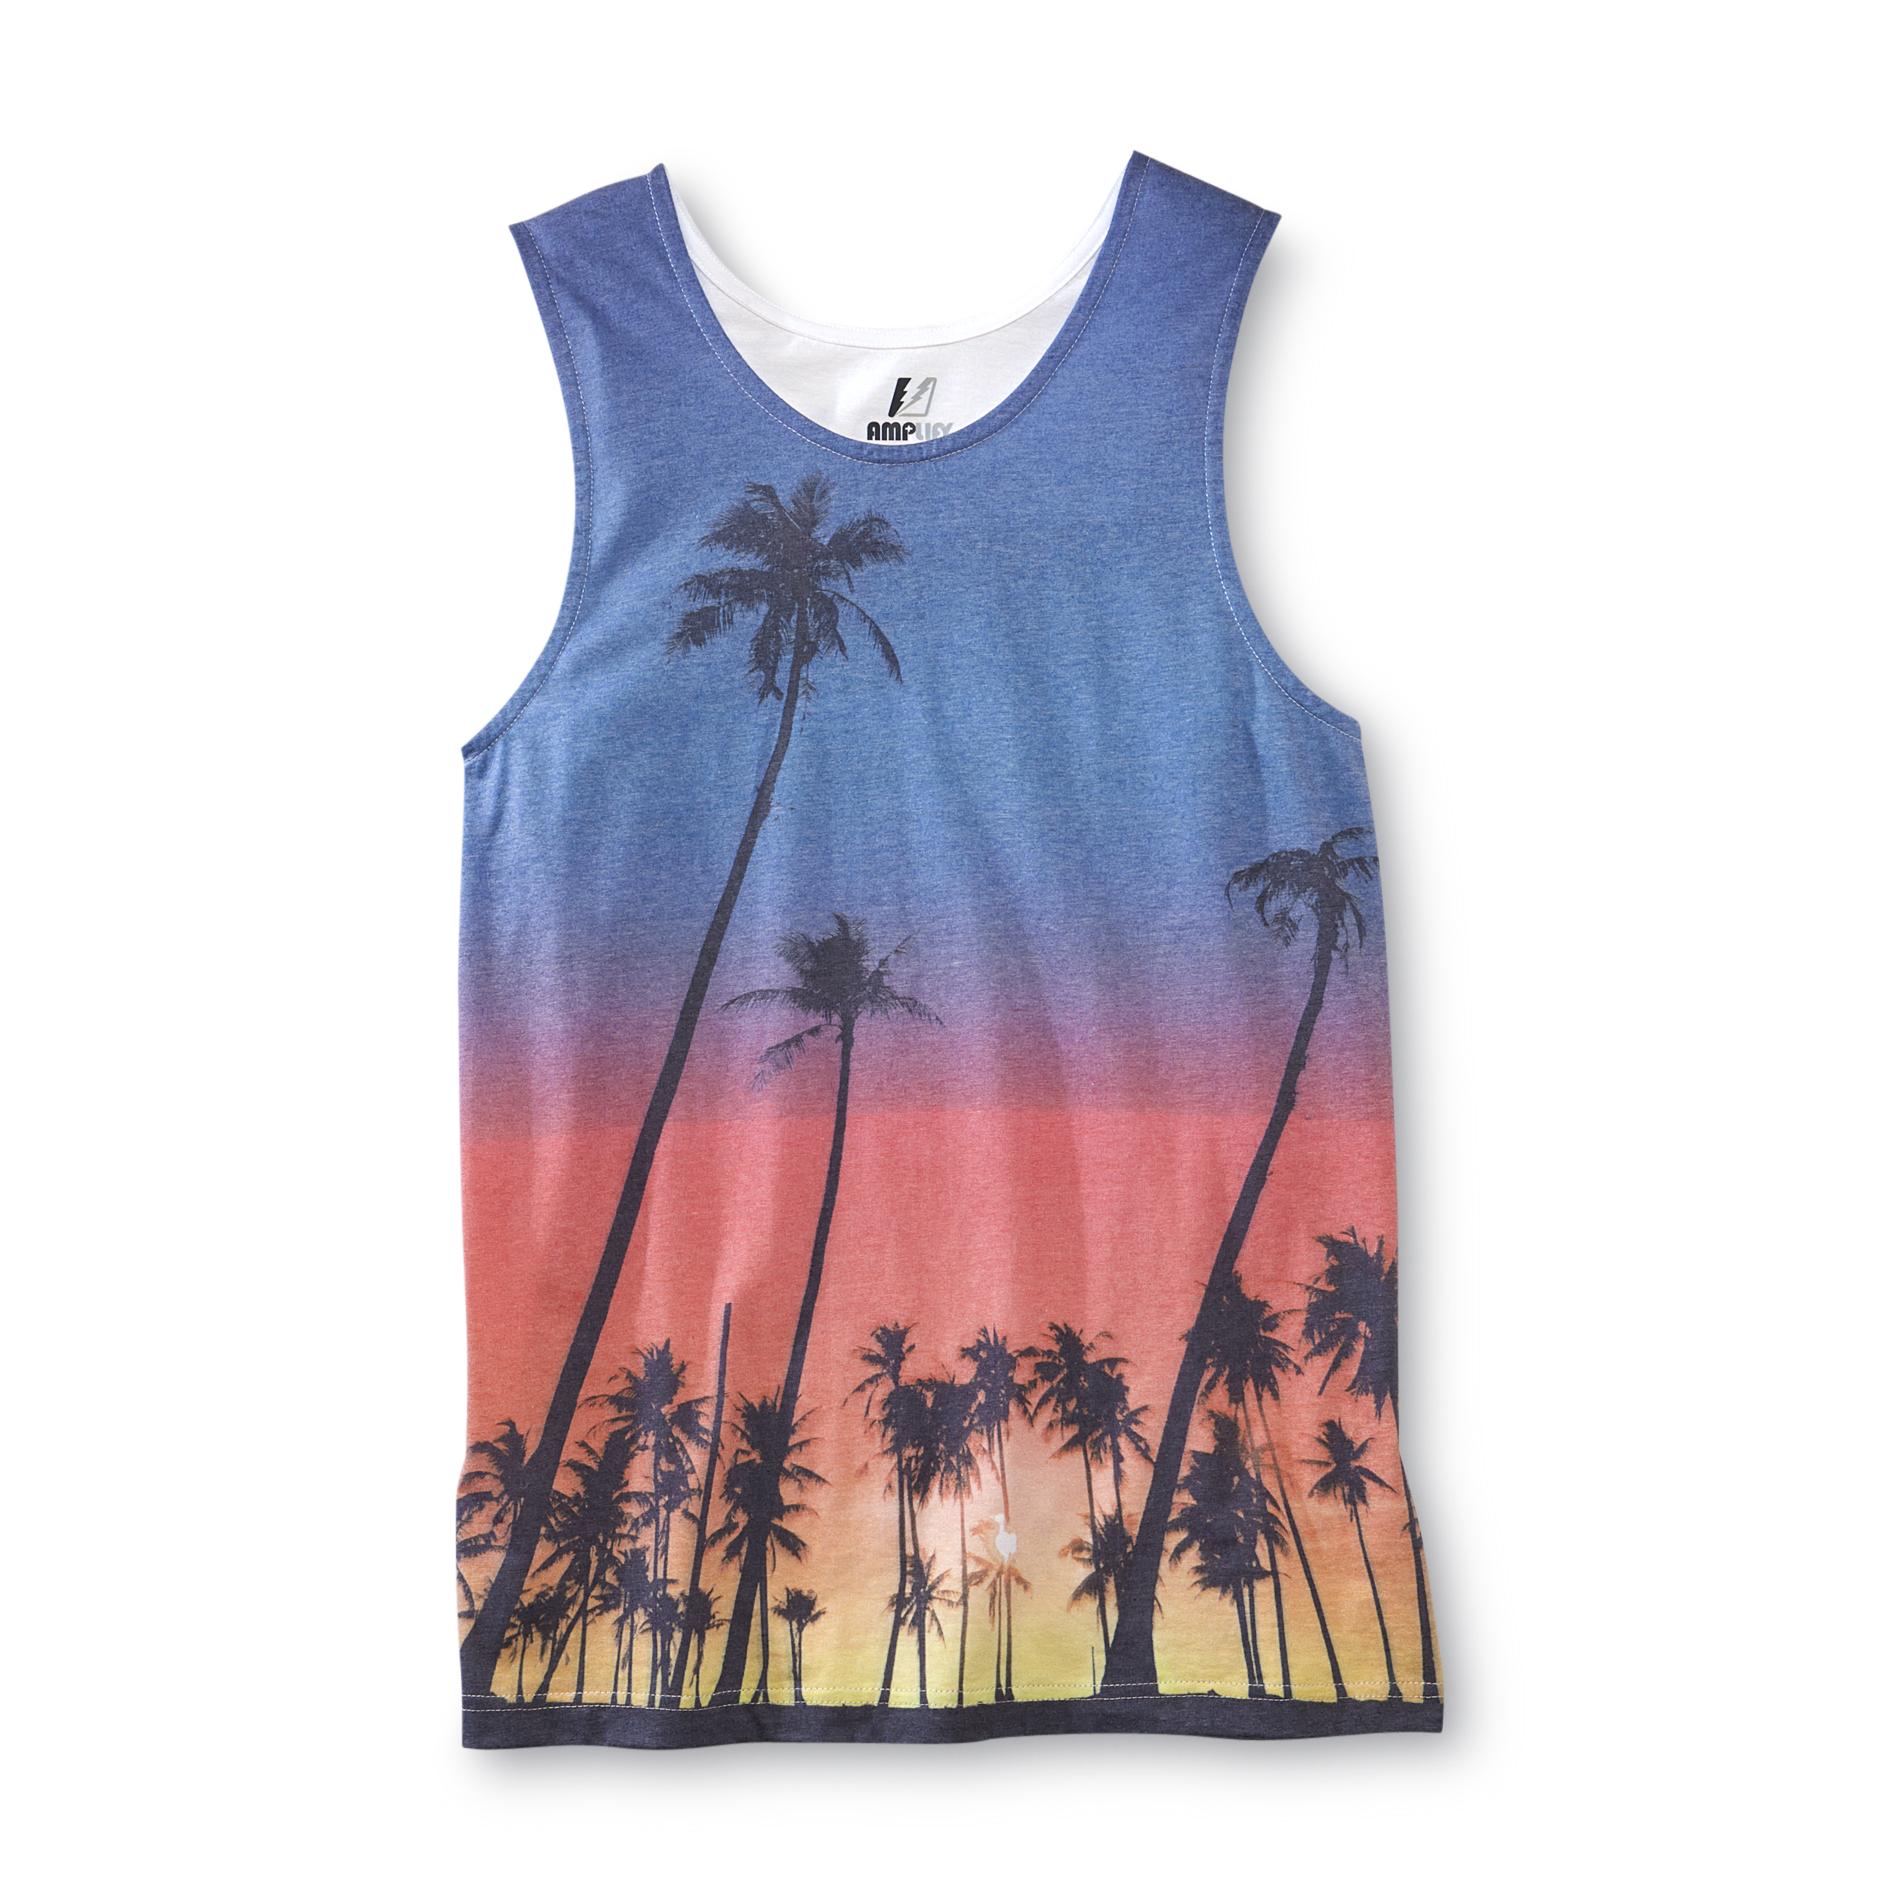 Amplify Young Men's Graphic Tank Top - Palm Trees